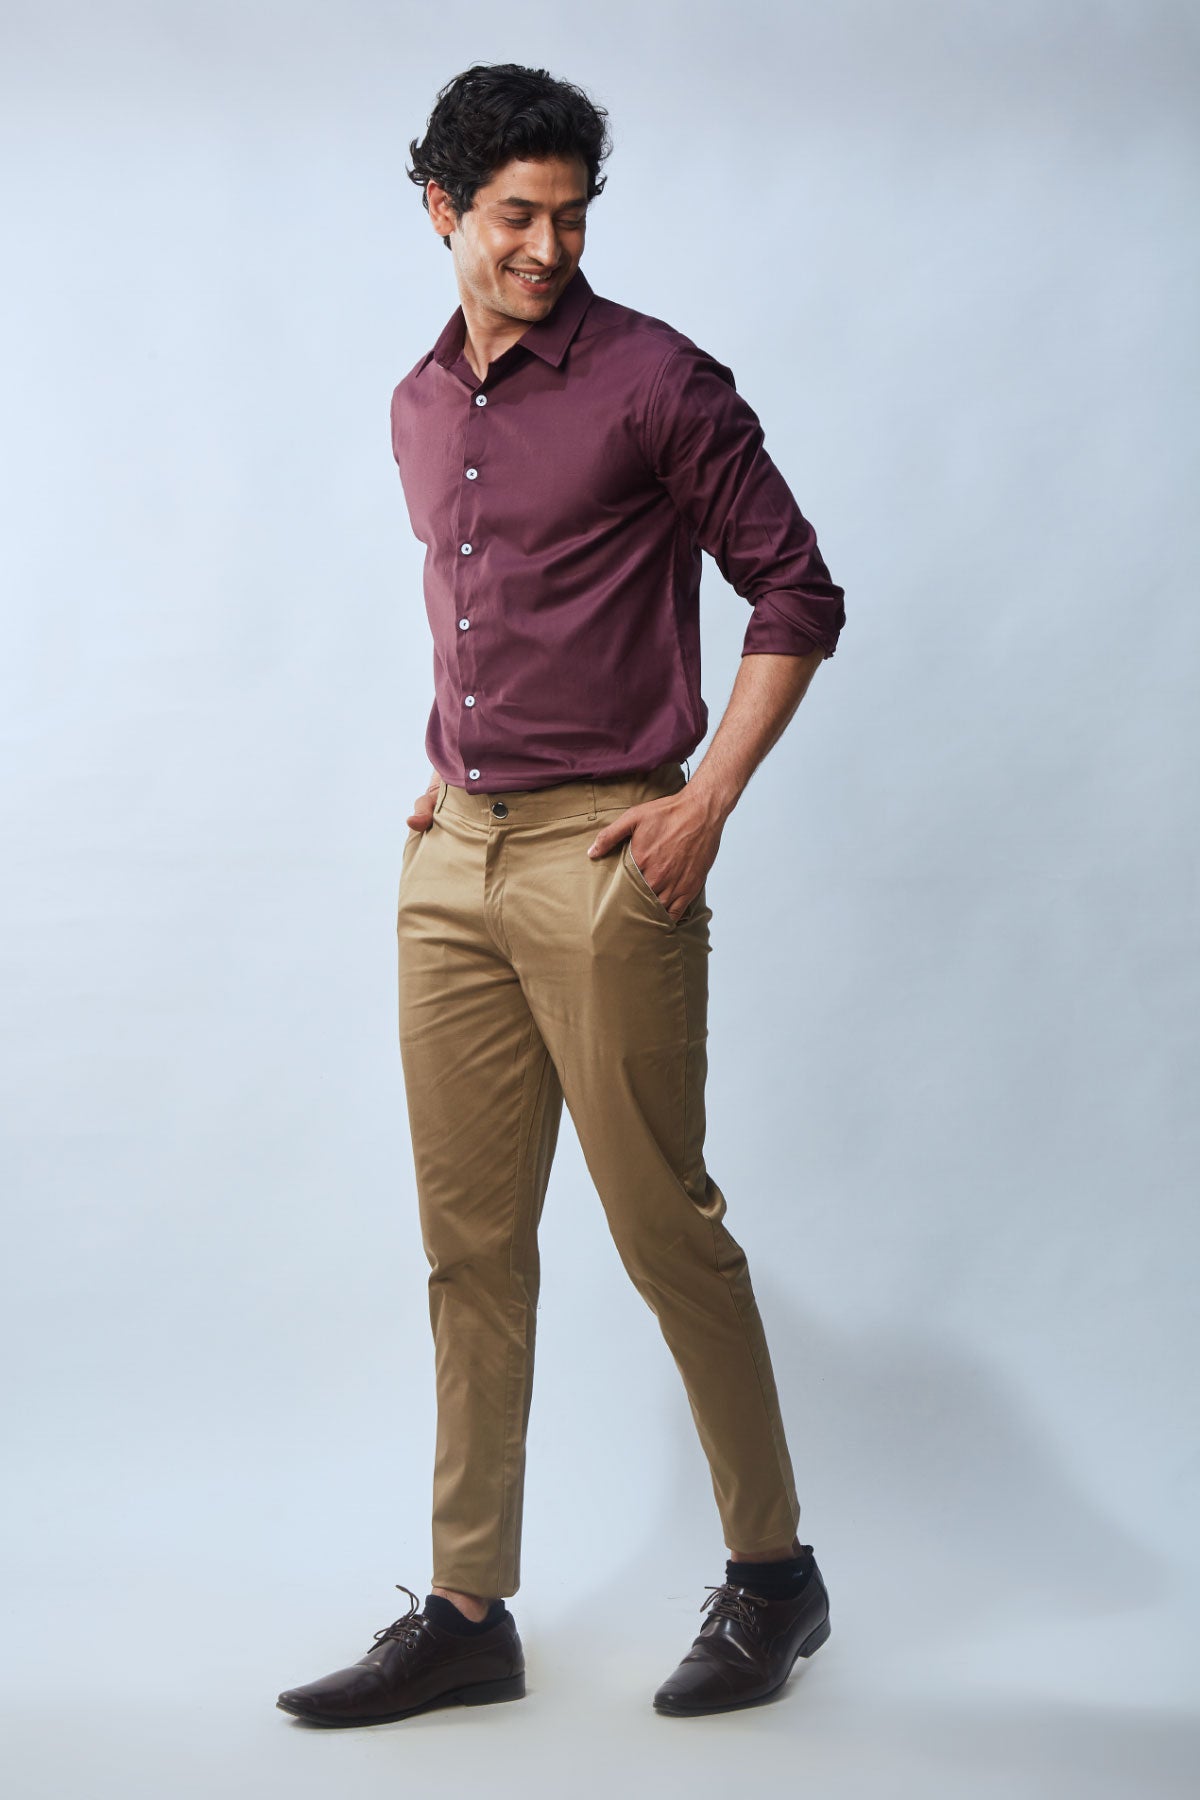 Need ideas for tops to match with beige pants : r/mensfashionadvice